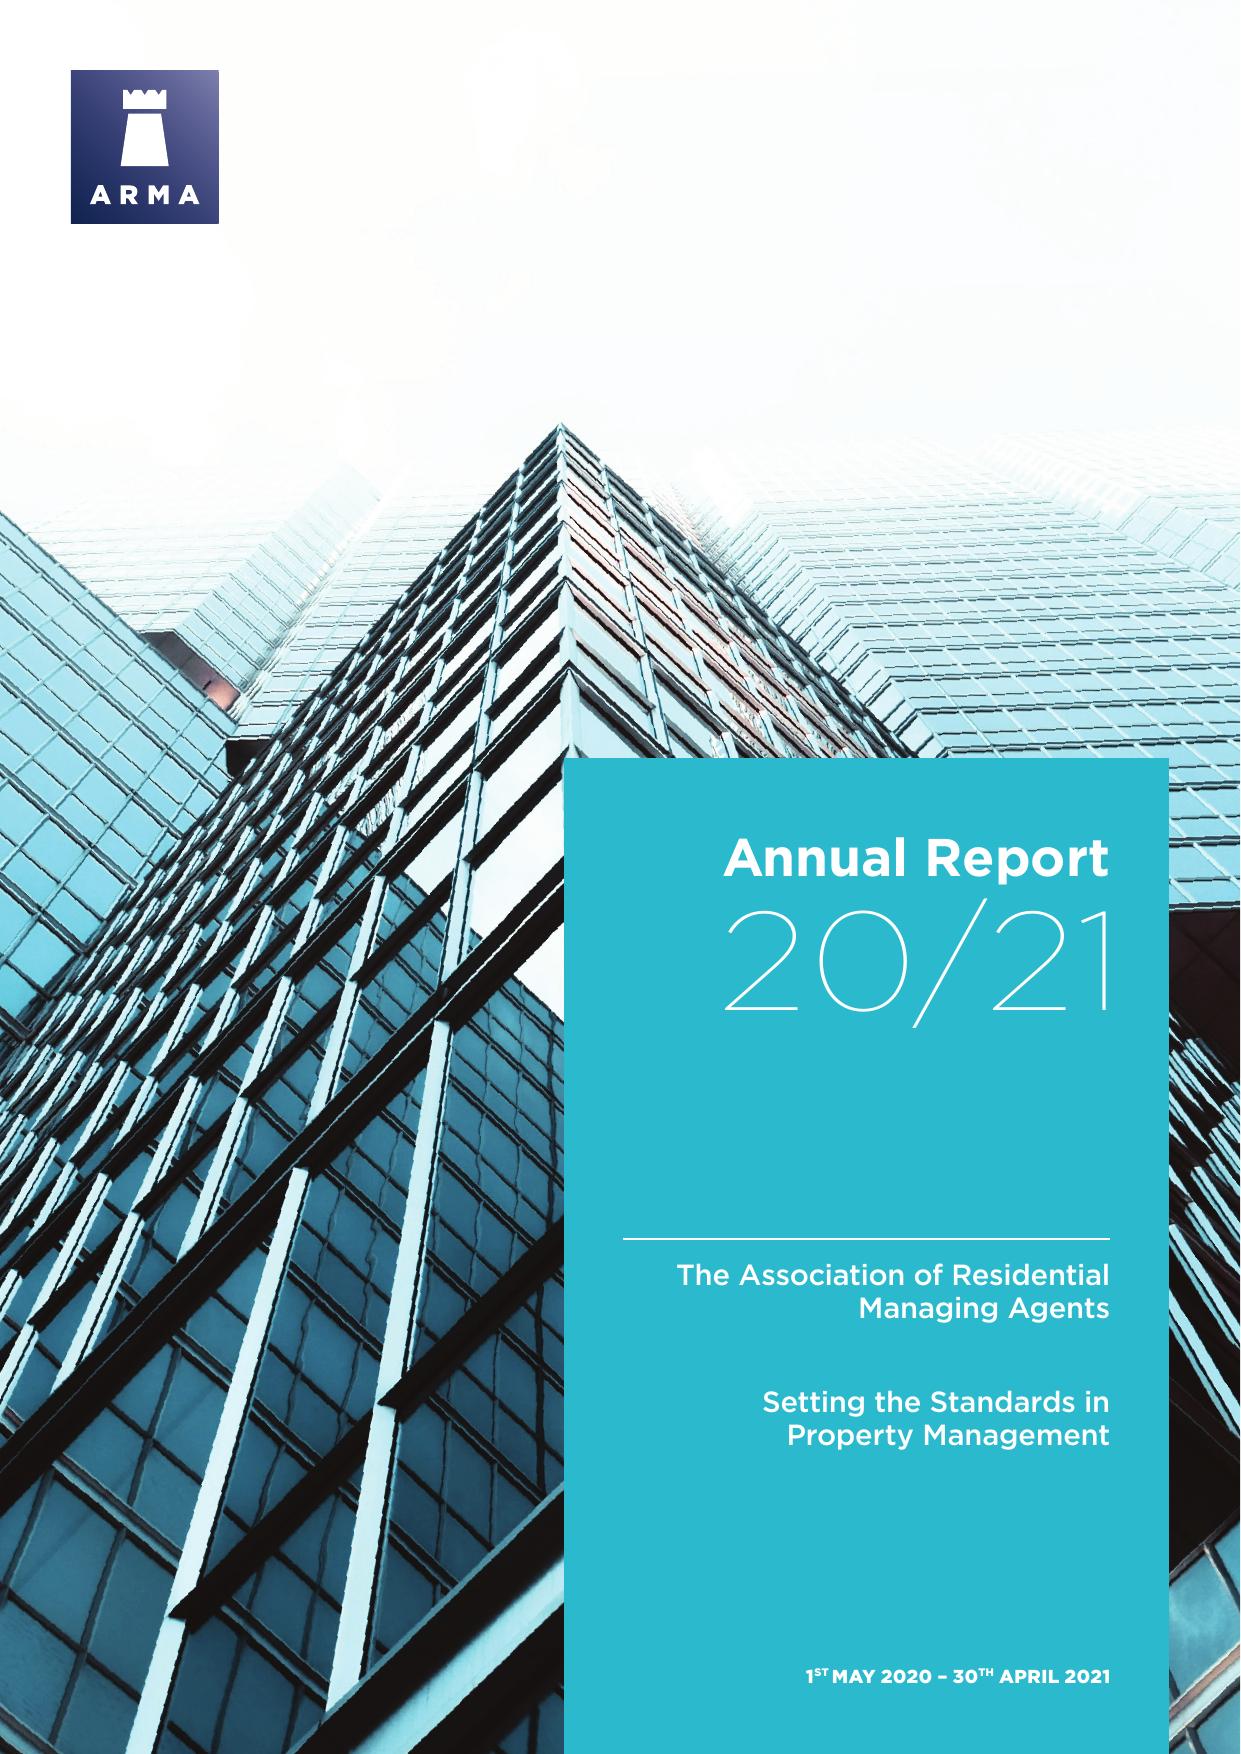 SPINDOGS 2022 Annual Report